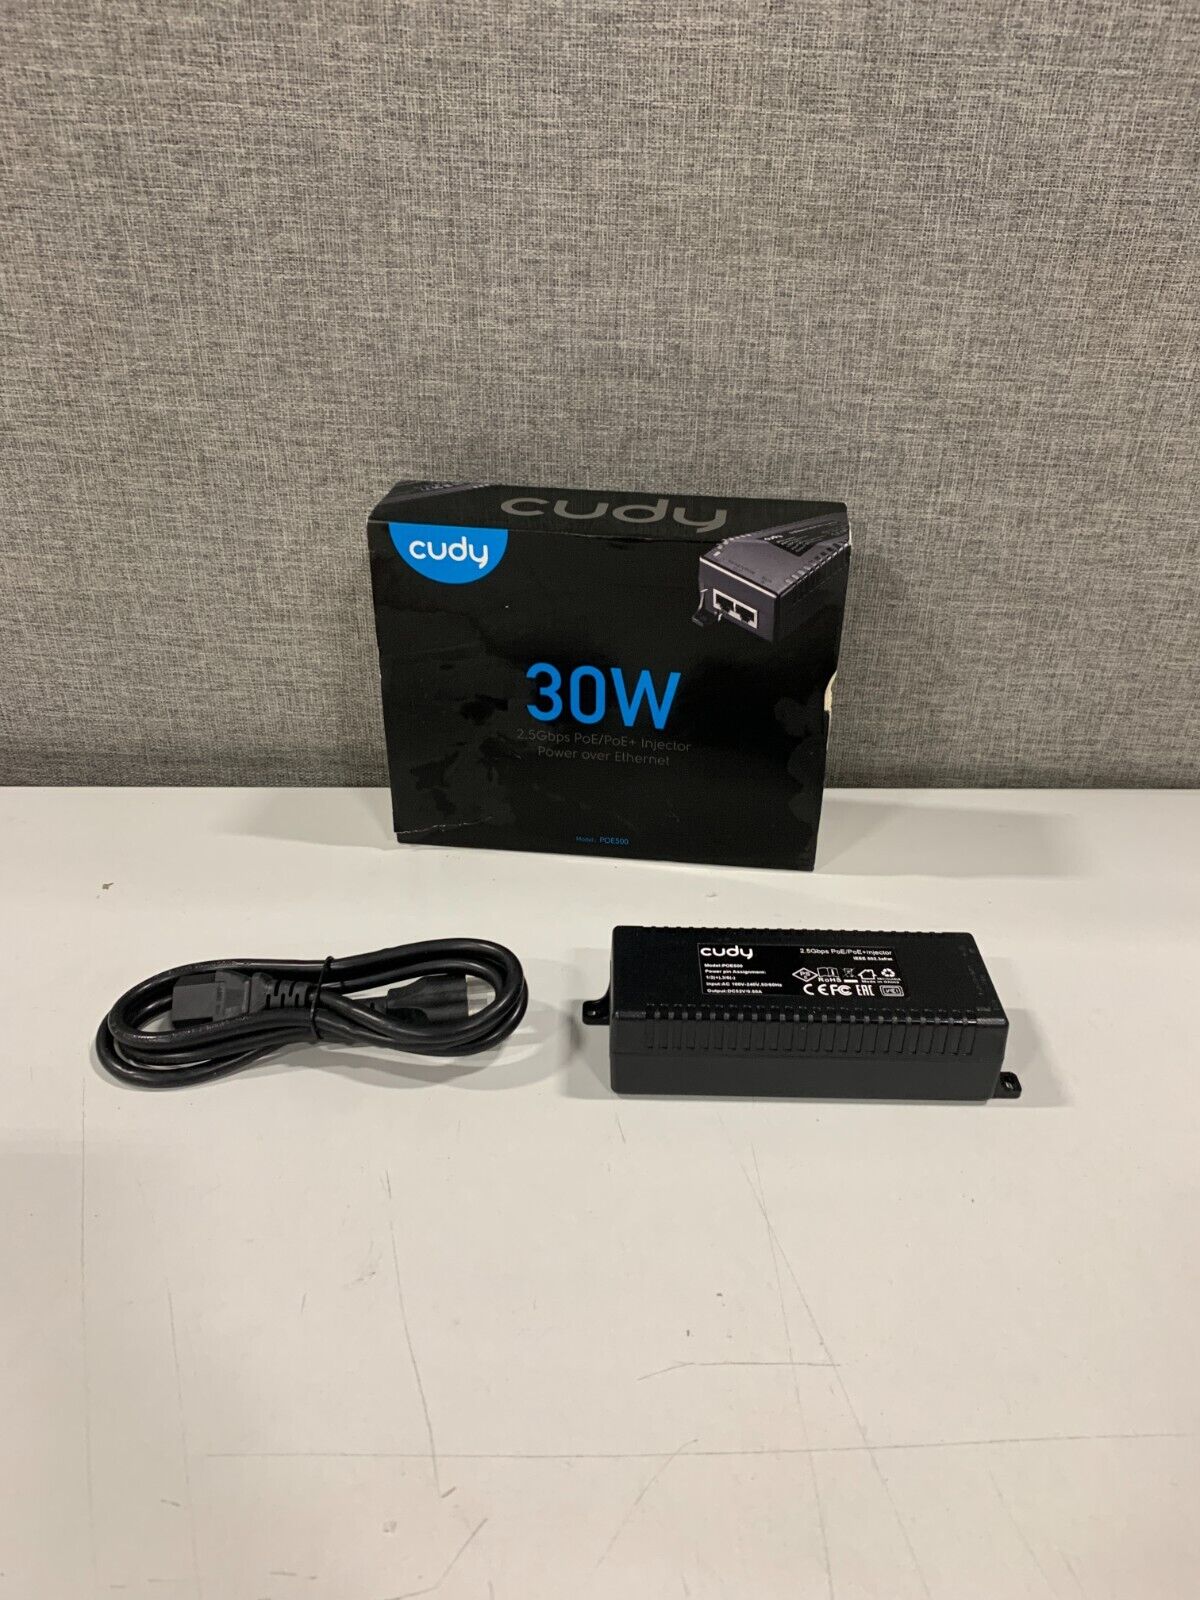 Cudy 30W Gigabit PoE+ Injector Adapter, IEEE 802.3 at and IEEE 802.3 af